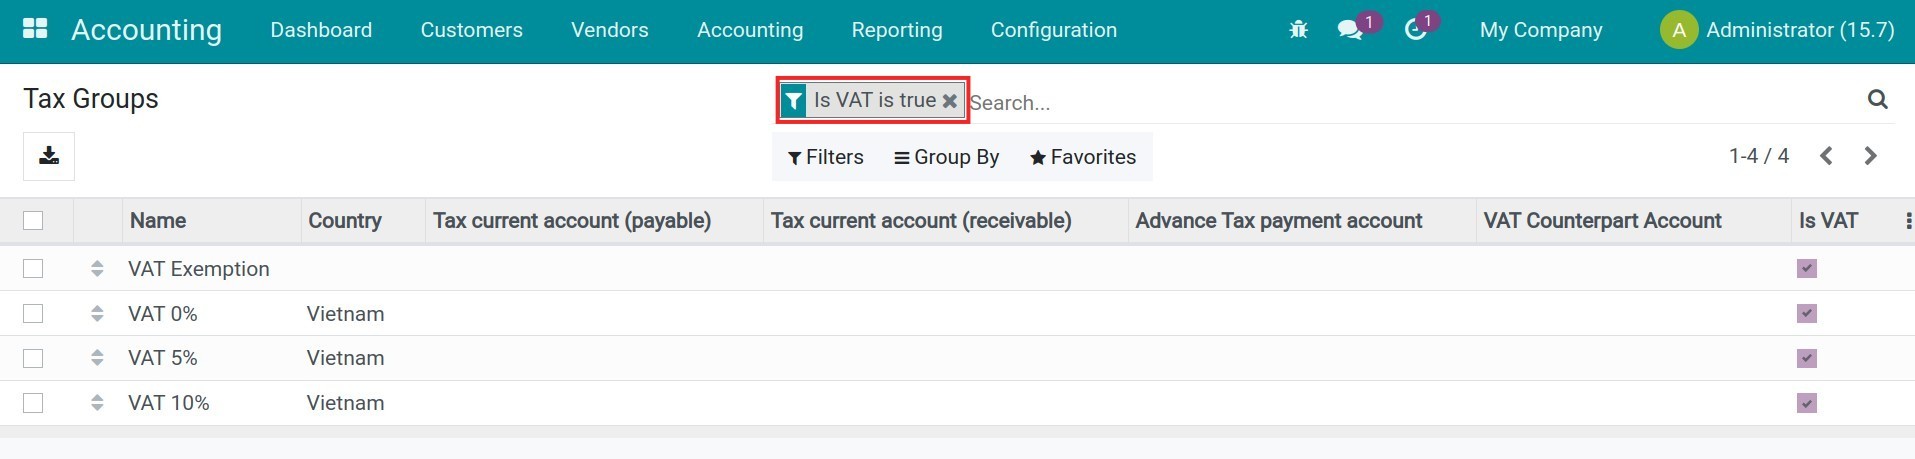 Tax group filter